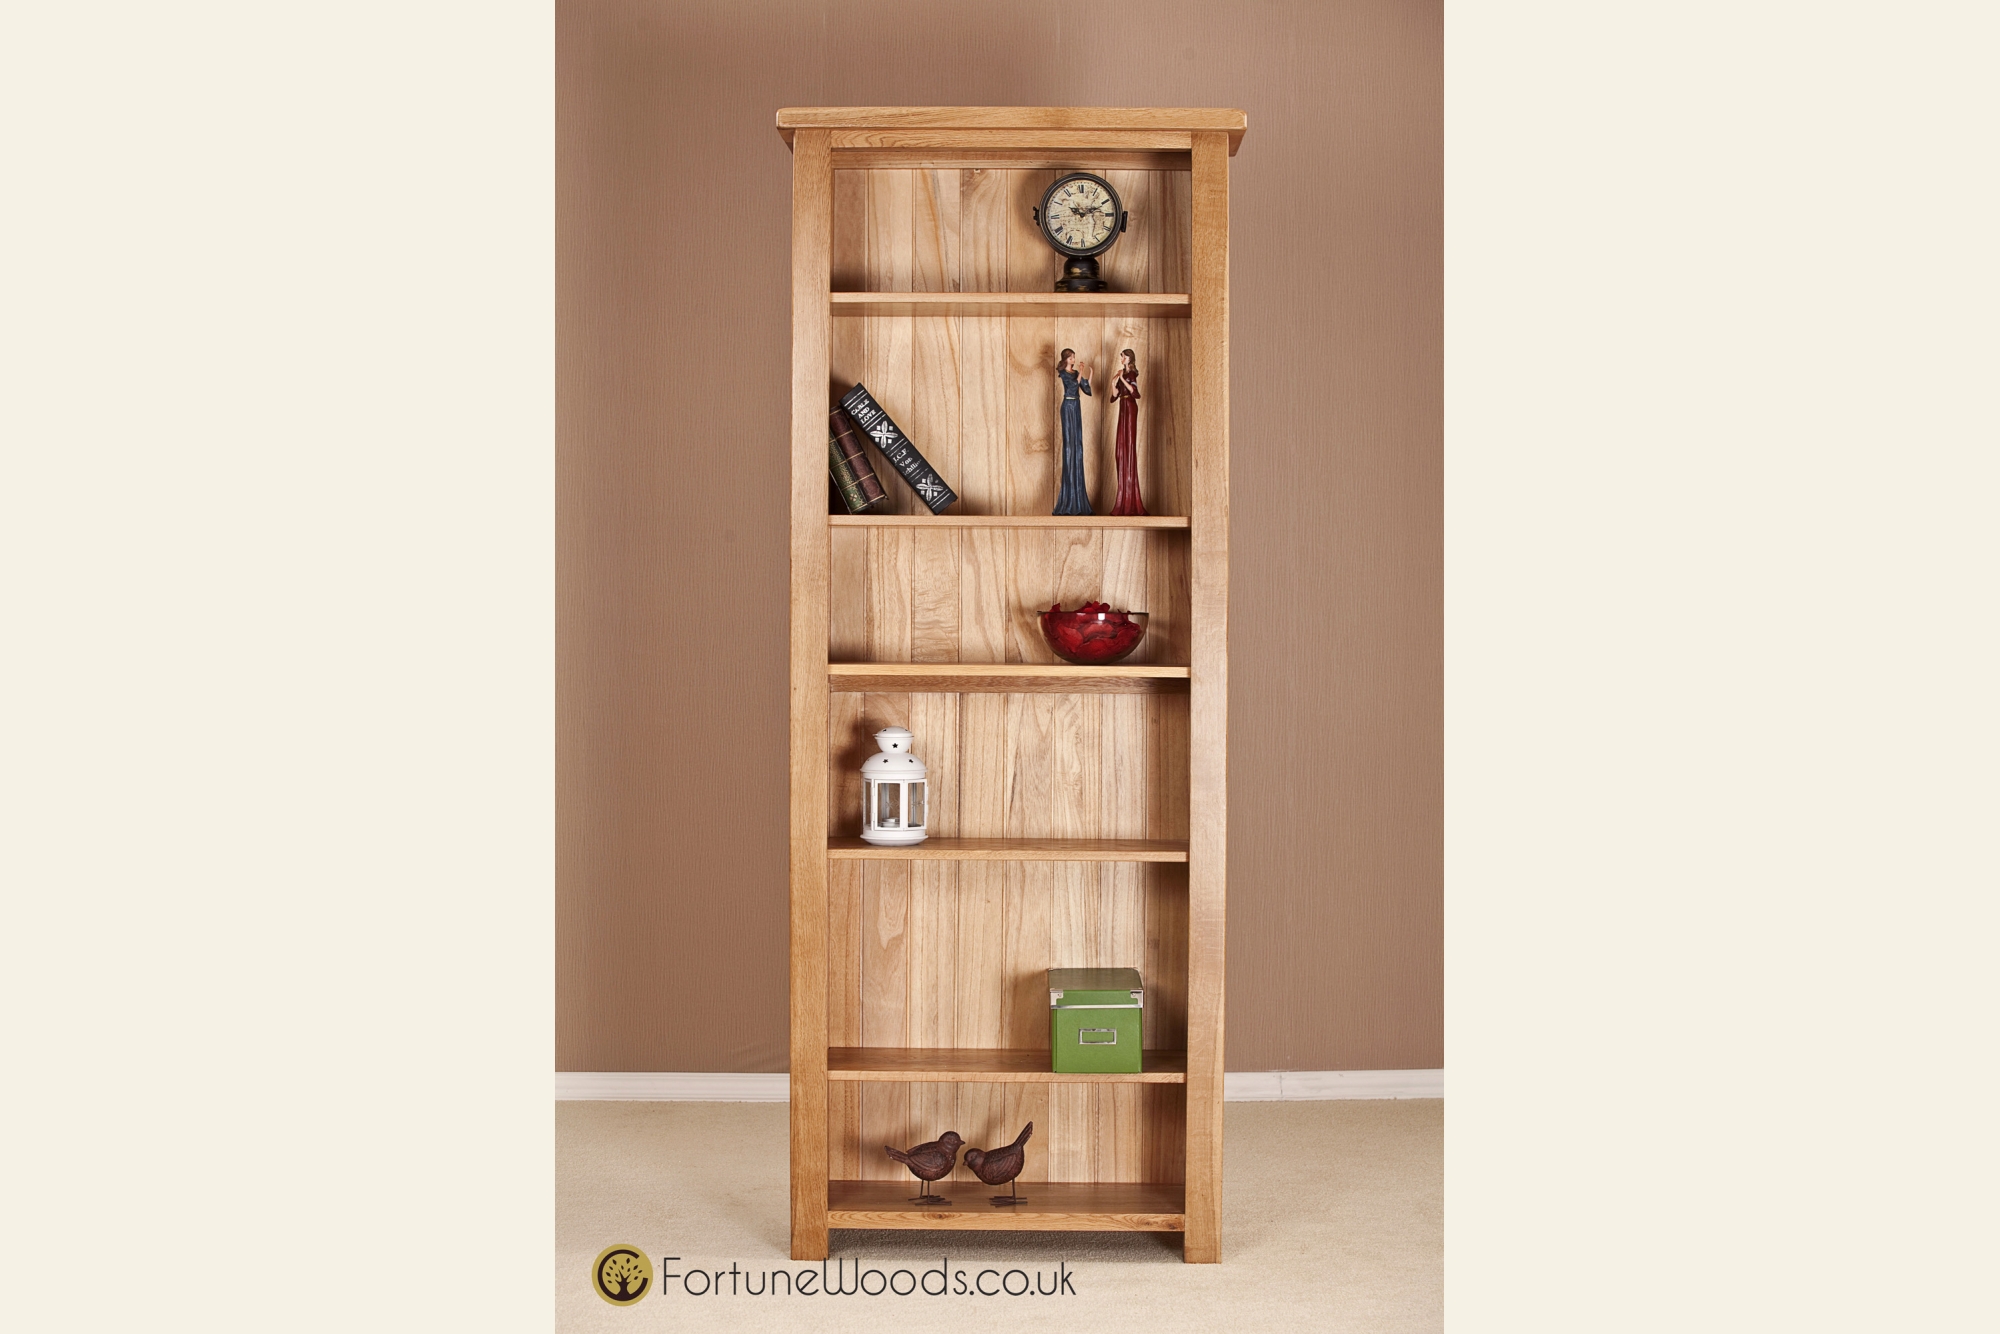 Fortune Woods Cotswold Bookcase